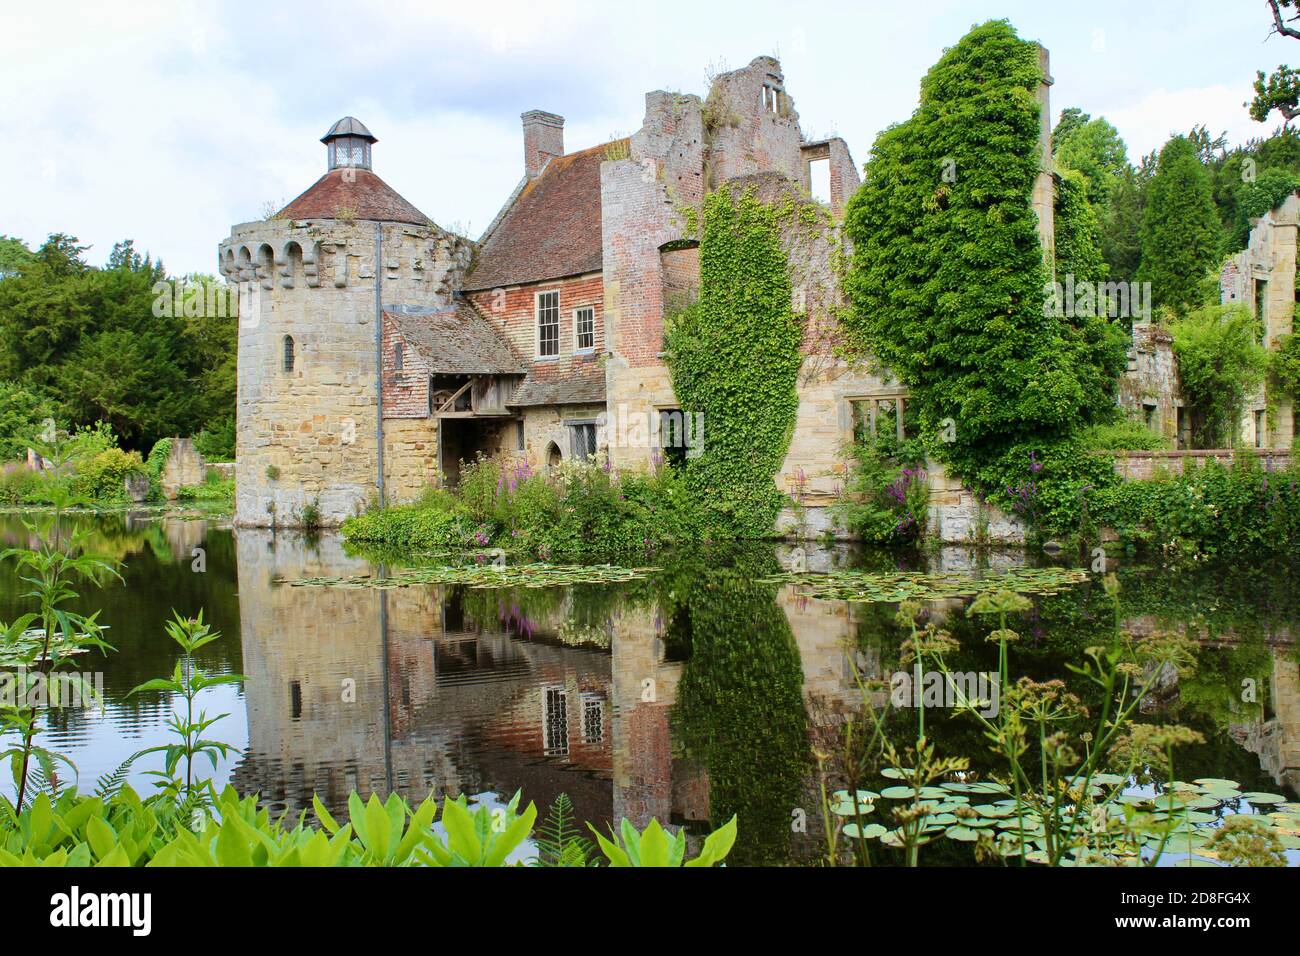 Scotney Castle Lake and Gardens in Summer. This beautiful and historic landscape is located in the valley of the River Bewl near Lamberhurst in Kent. Stock Photo